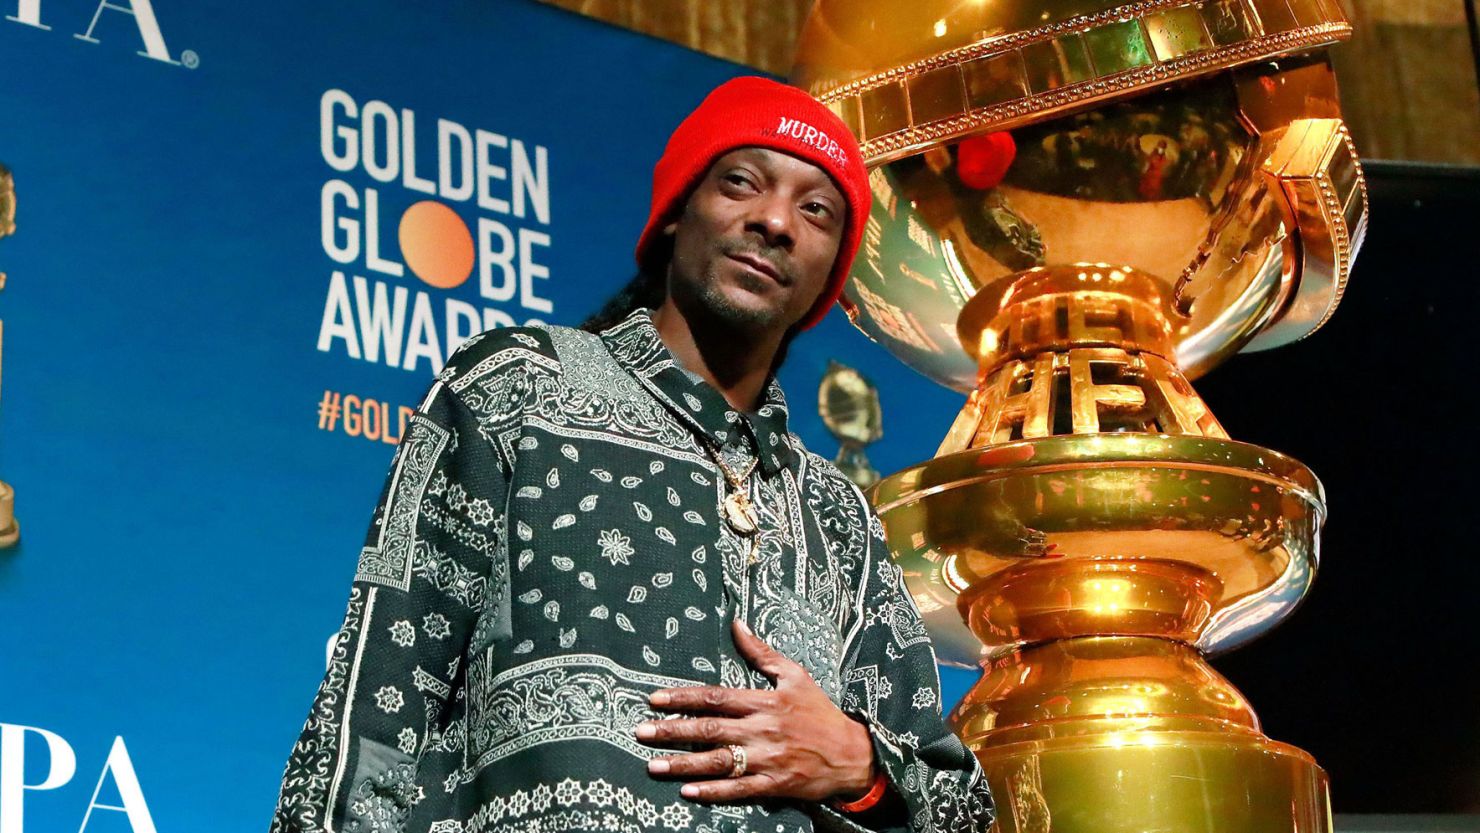 Snoop Dogg attends the nomination announcements for the annual Golden Globe Awards at the Beverly Hilton in Beverly Hills, California, in December 2021.